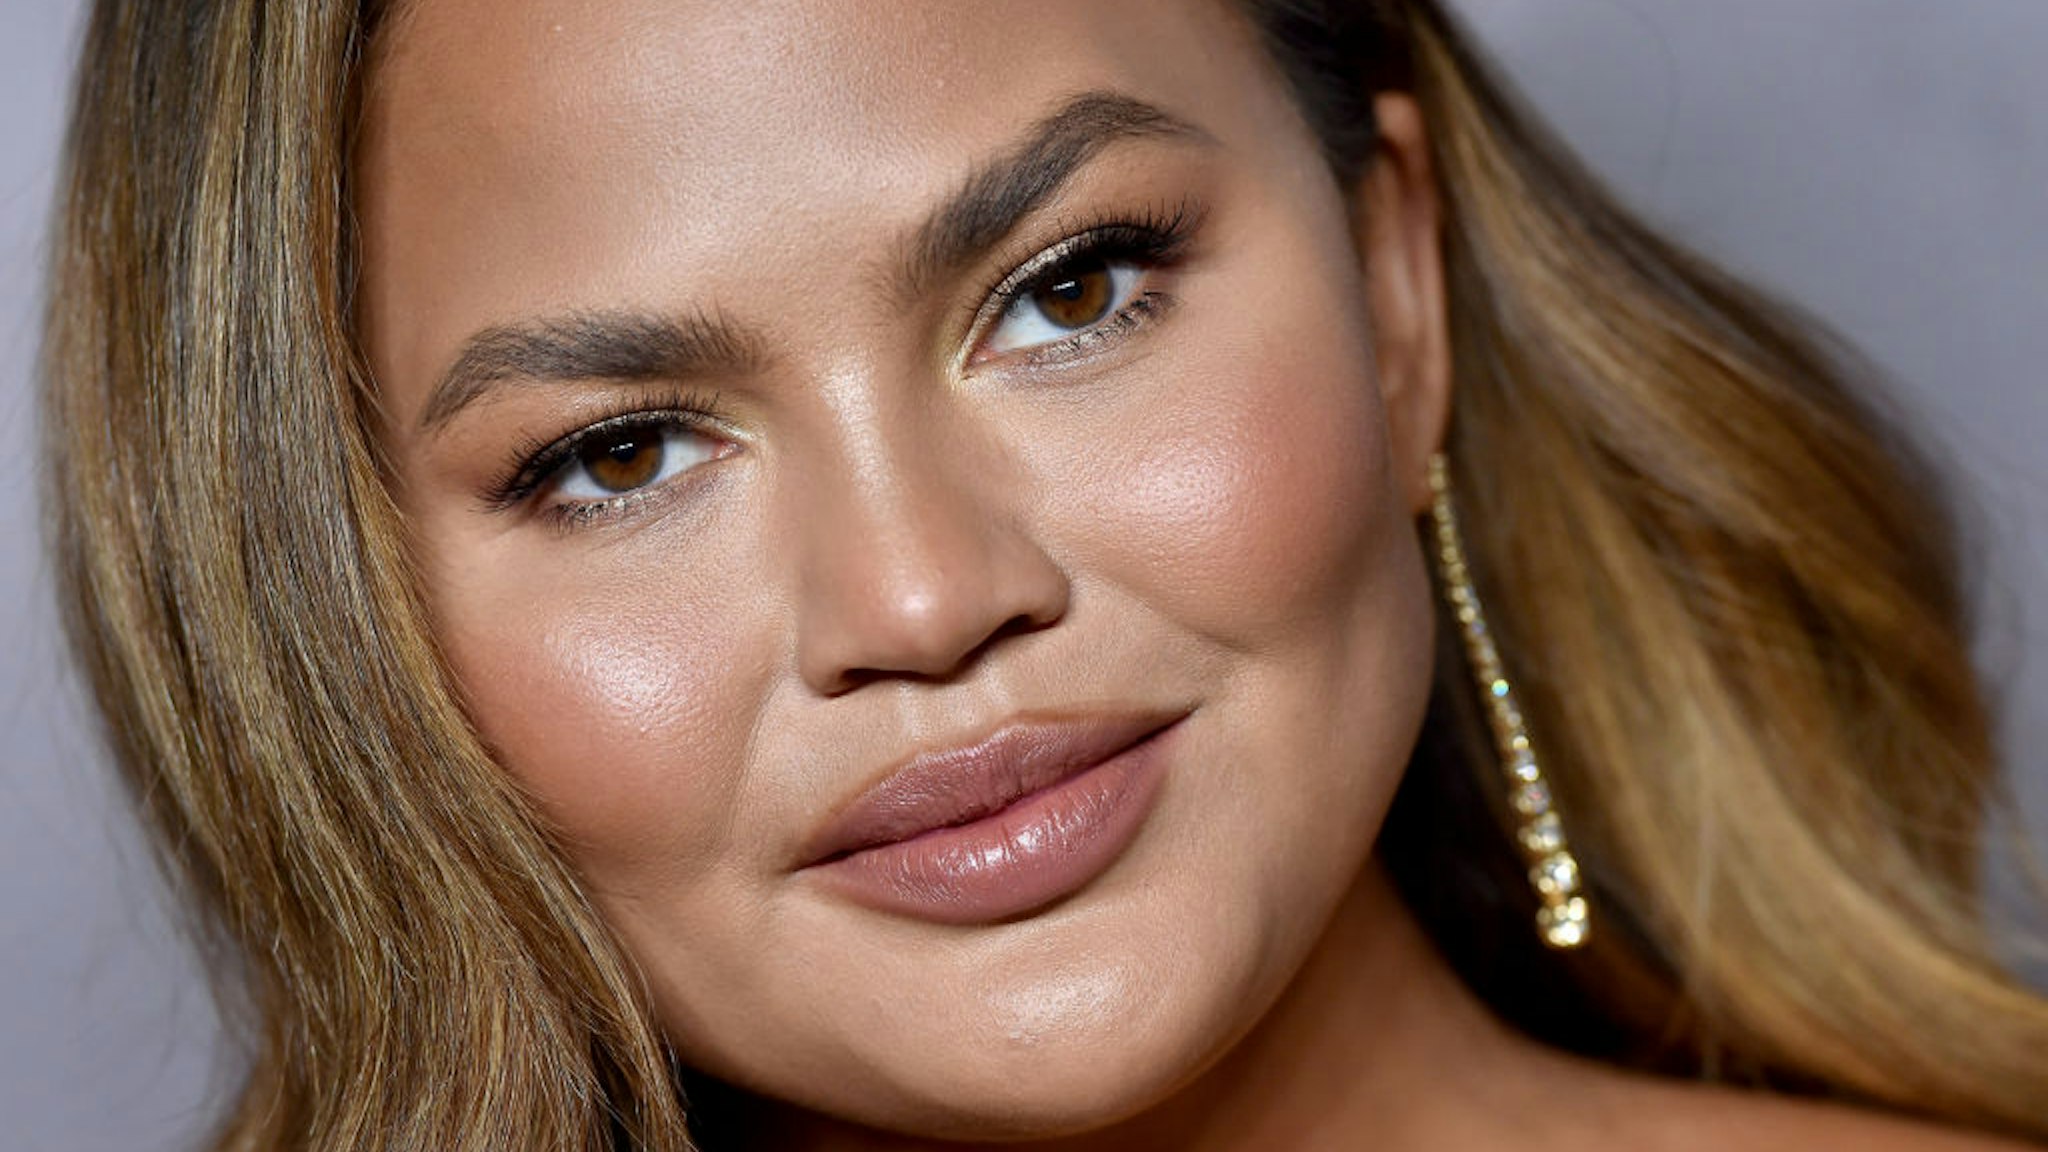 Chrissy Teigen attends the 2019 Baby2Baby Gala Presented By Paul Mitchell at 3LABS on November 09, 2019 in Culver City, California.